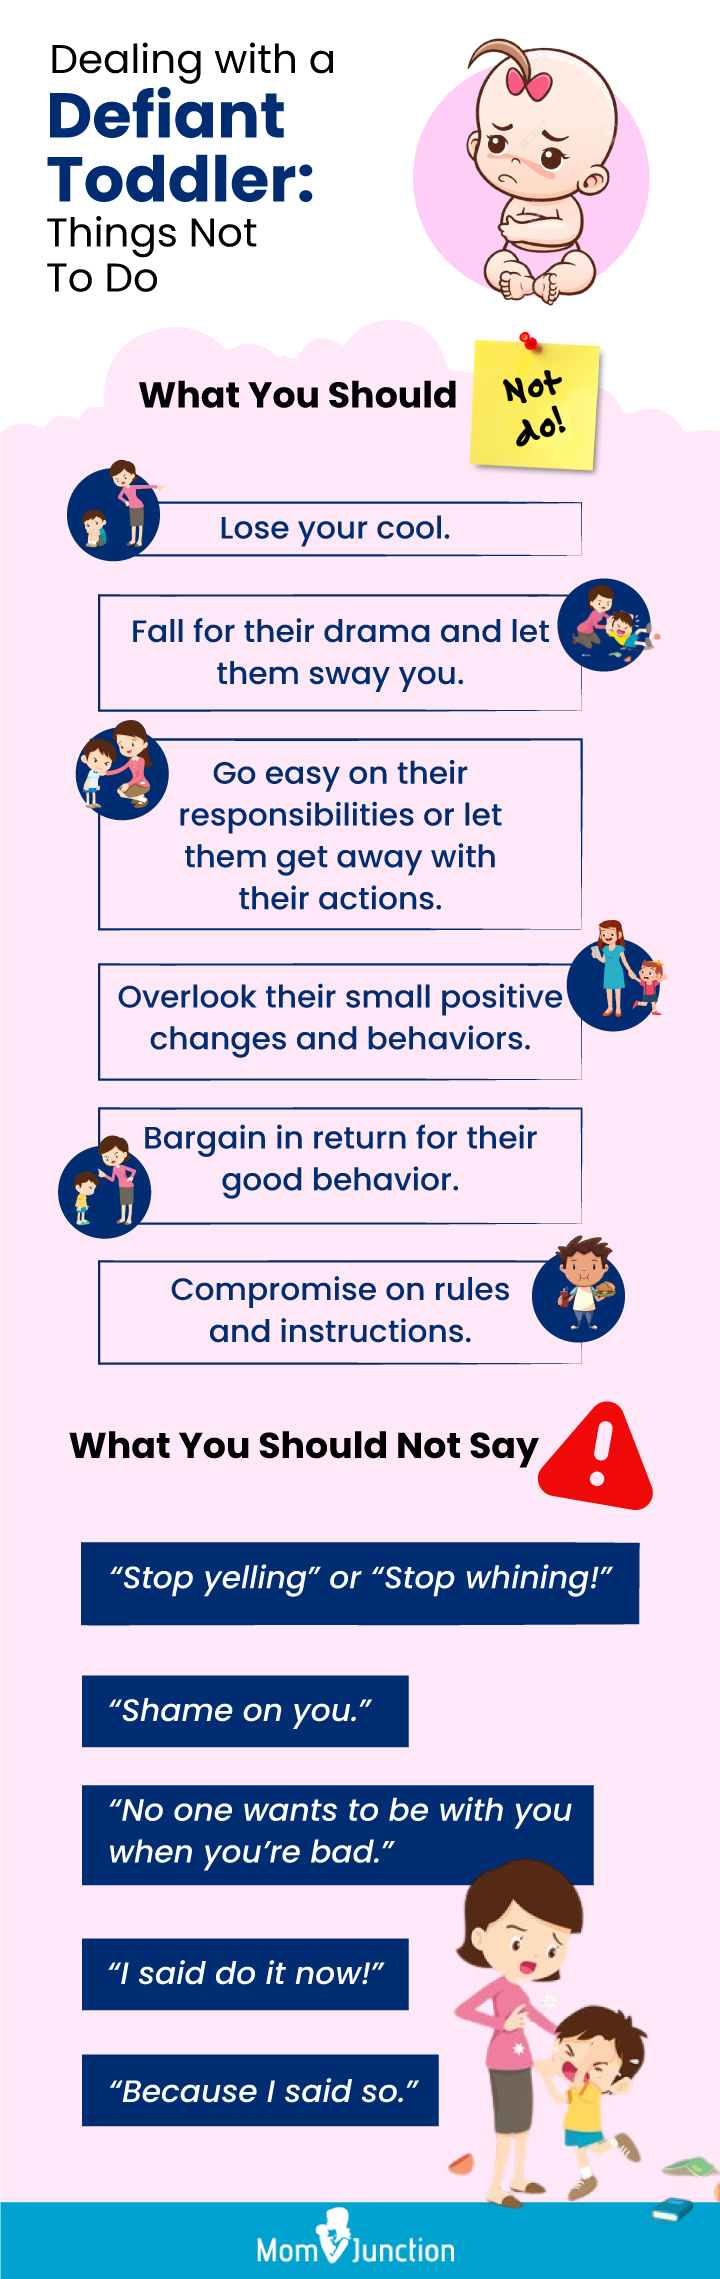 dealing with a defiant toddler (infographic)